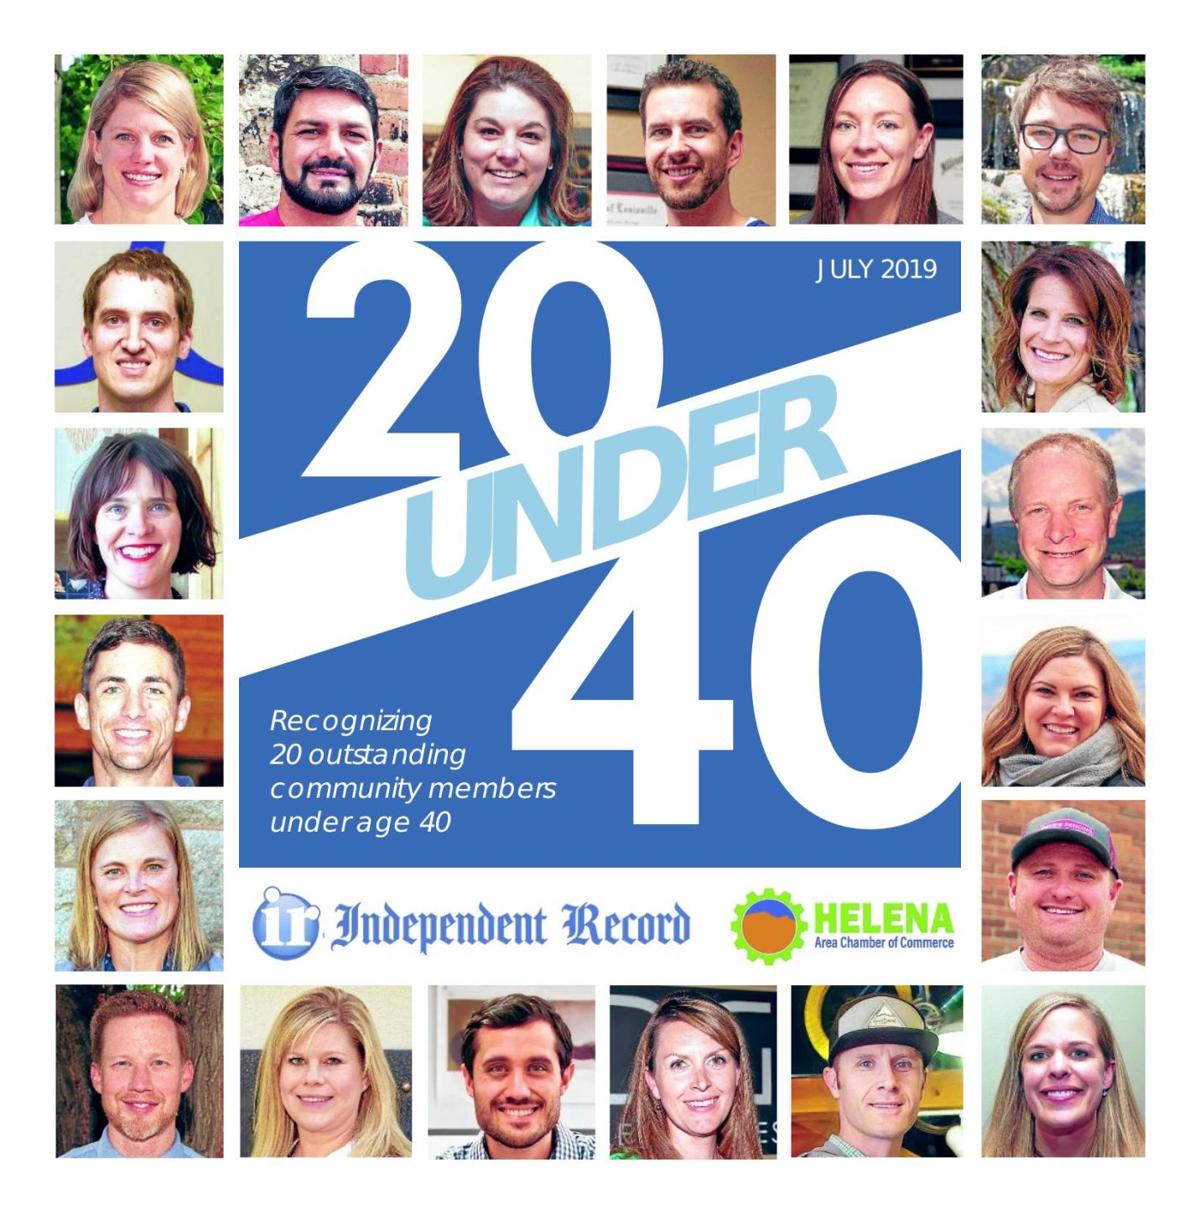 20 Under 40 - Recognizing 20 Outstanding Community Members Under Age 40 - July 2019